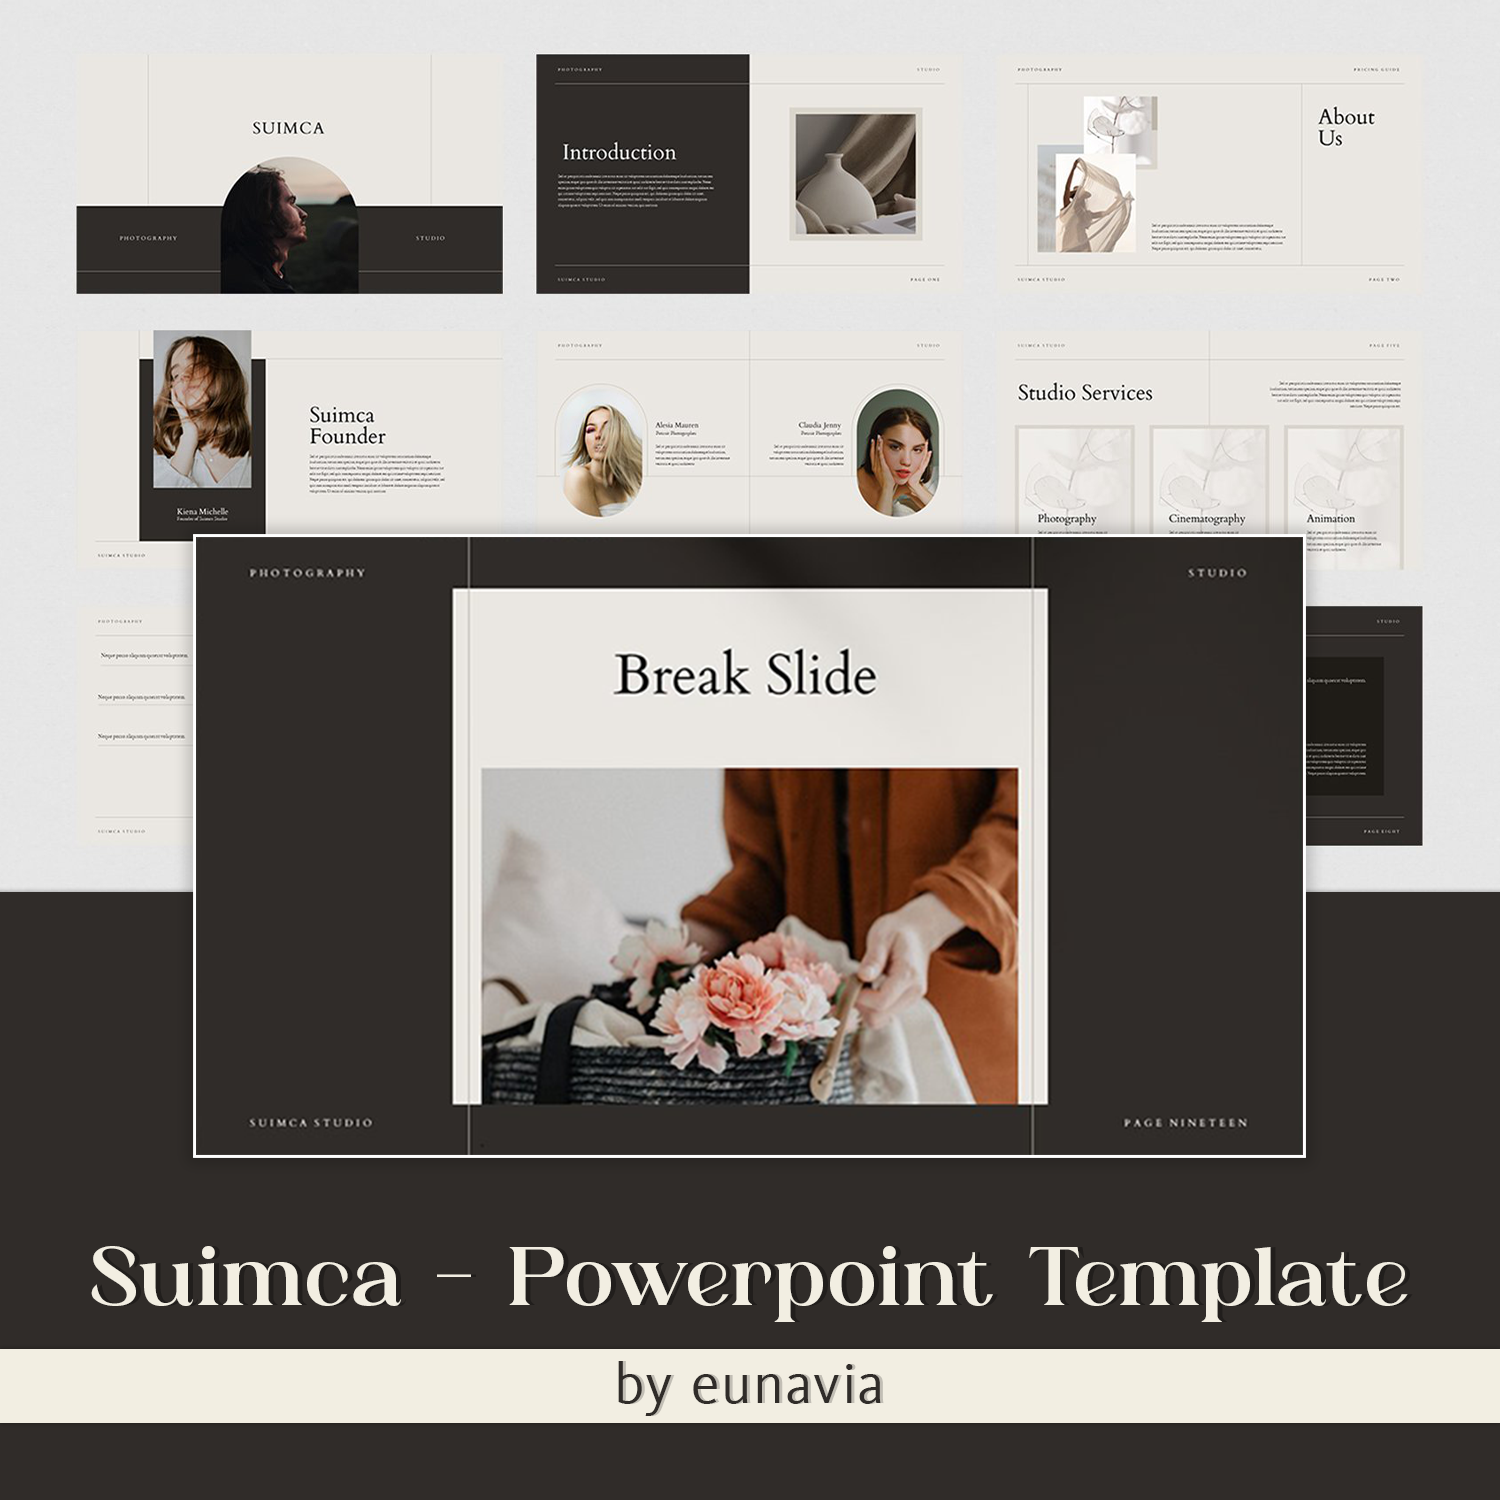 Prints of suimca powerpoint template.